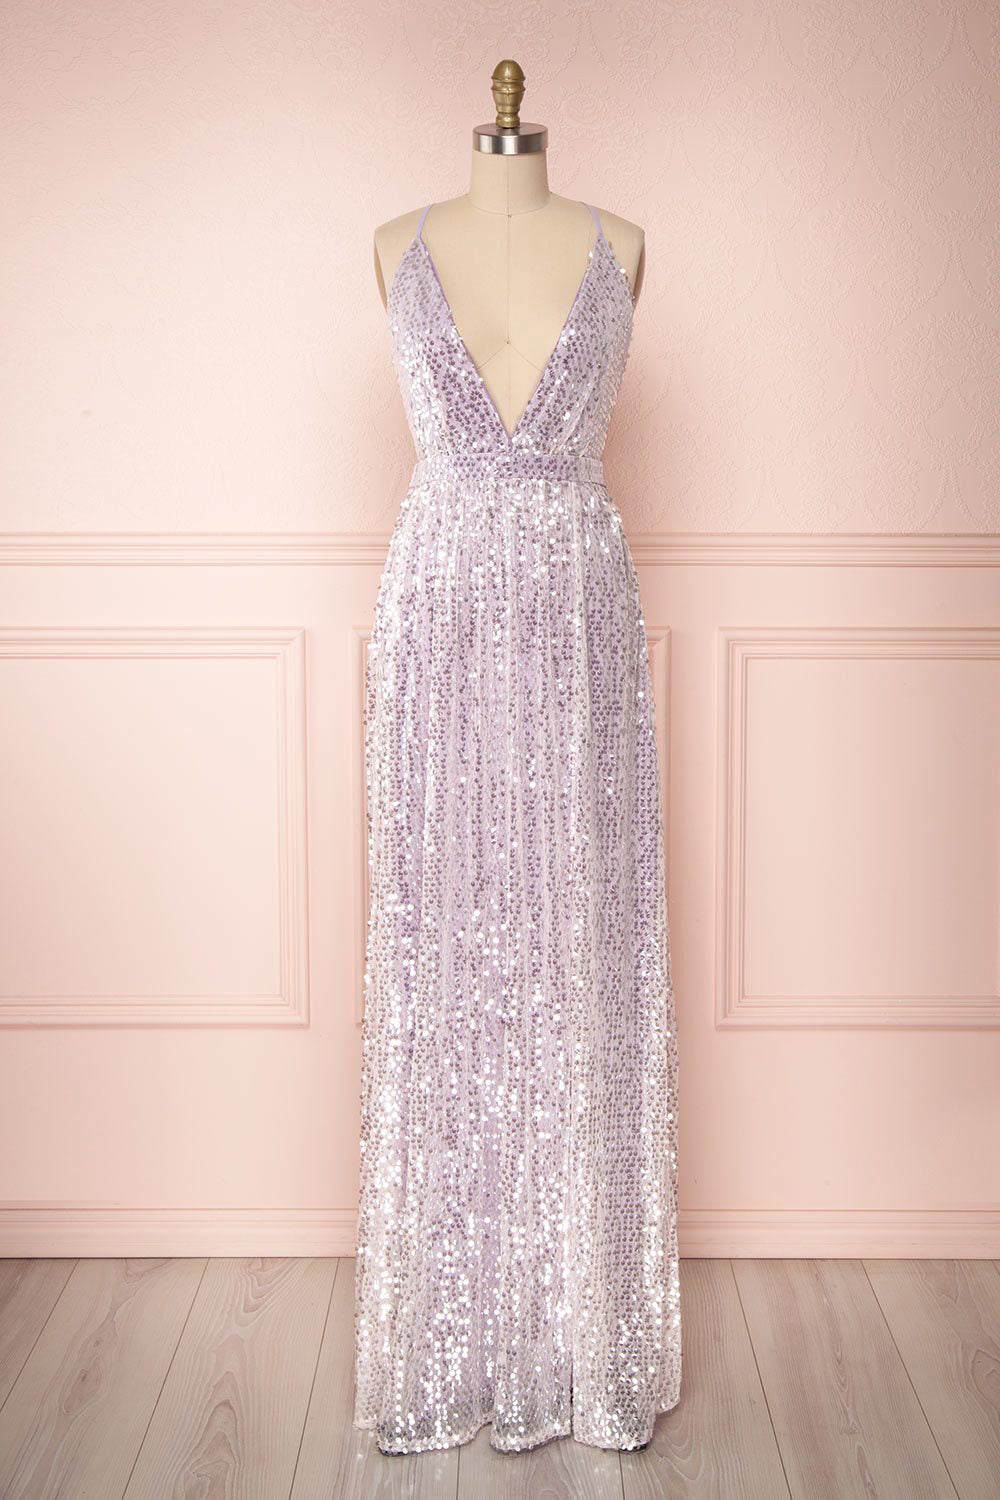 Shayana Lilas Lilac Mesh Gown with Plunging Neckline | Boutique 1861